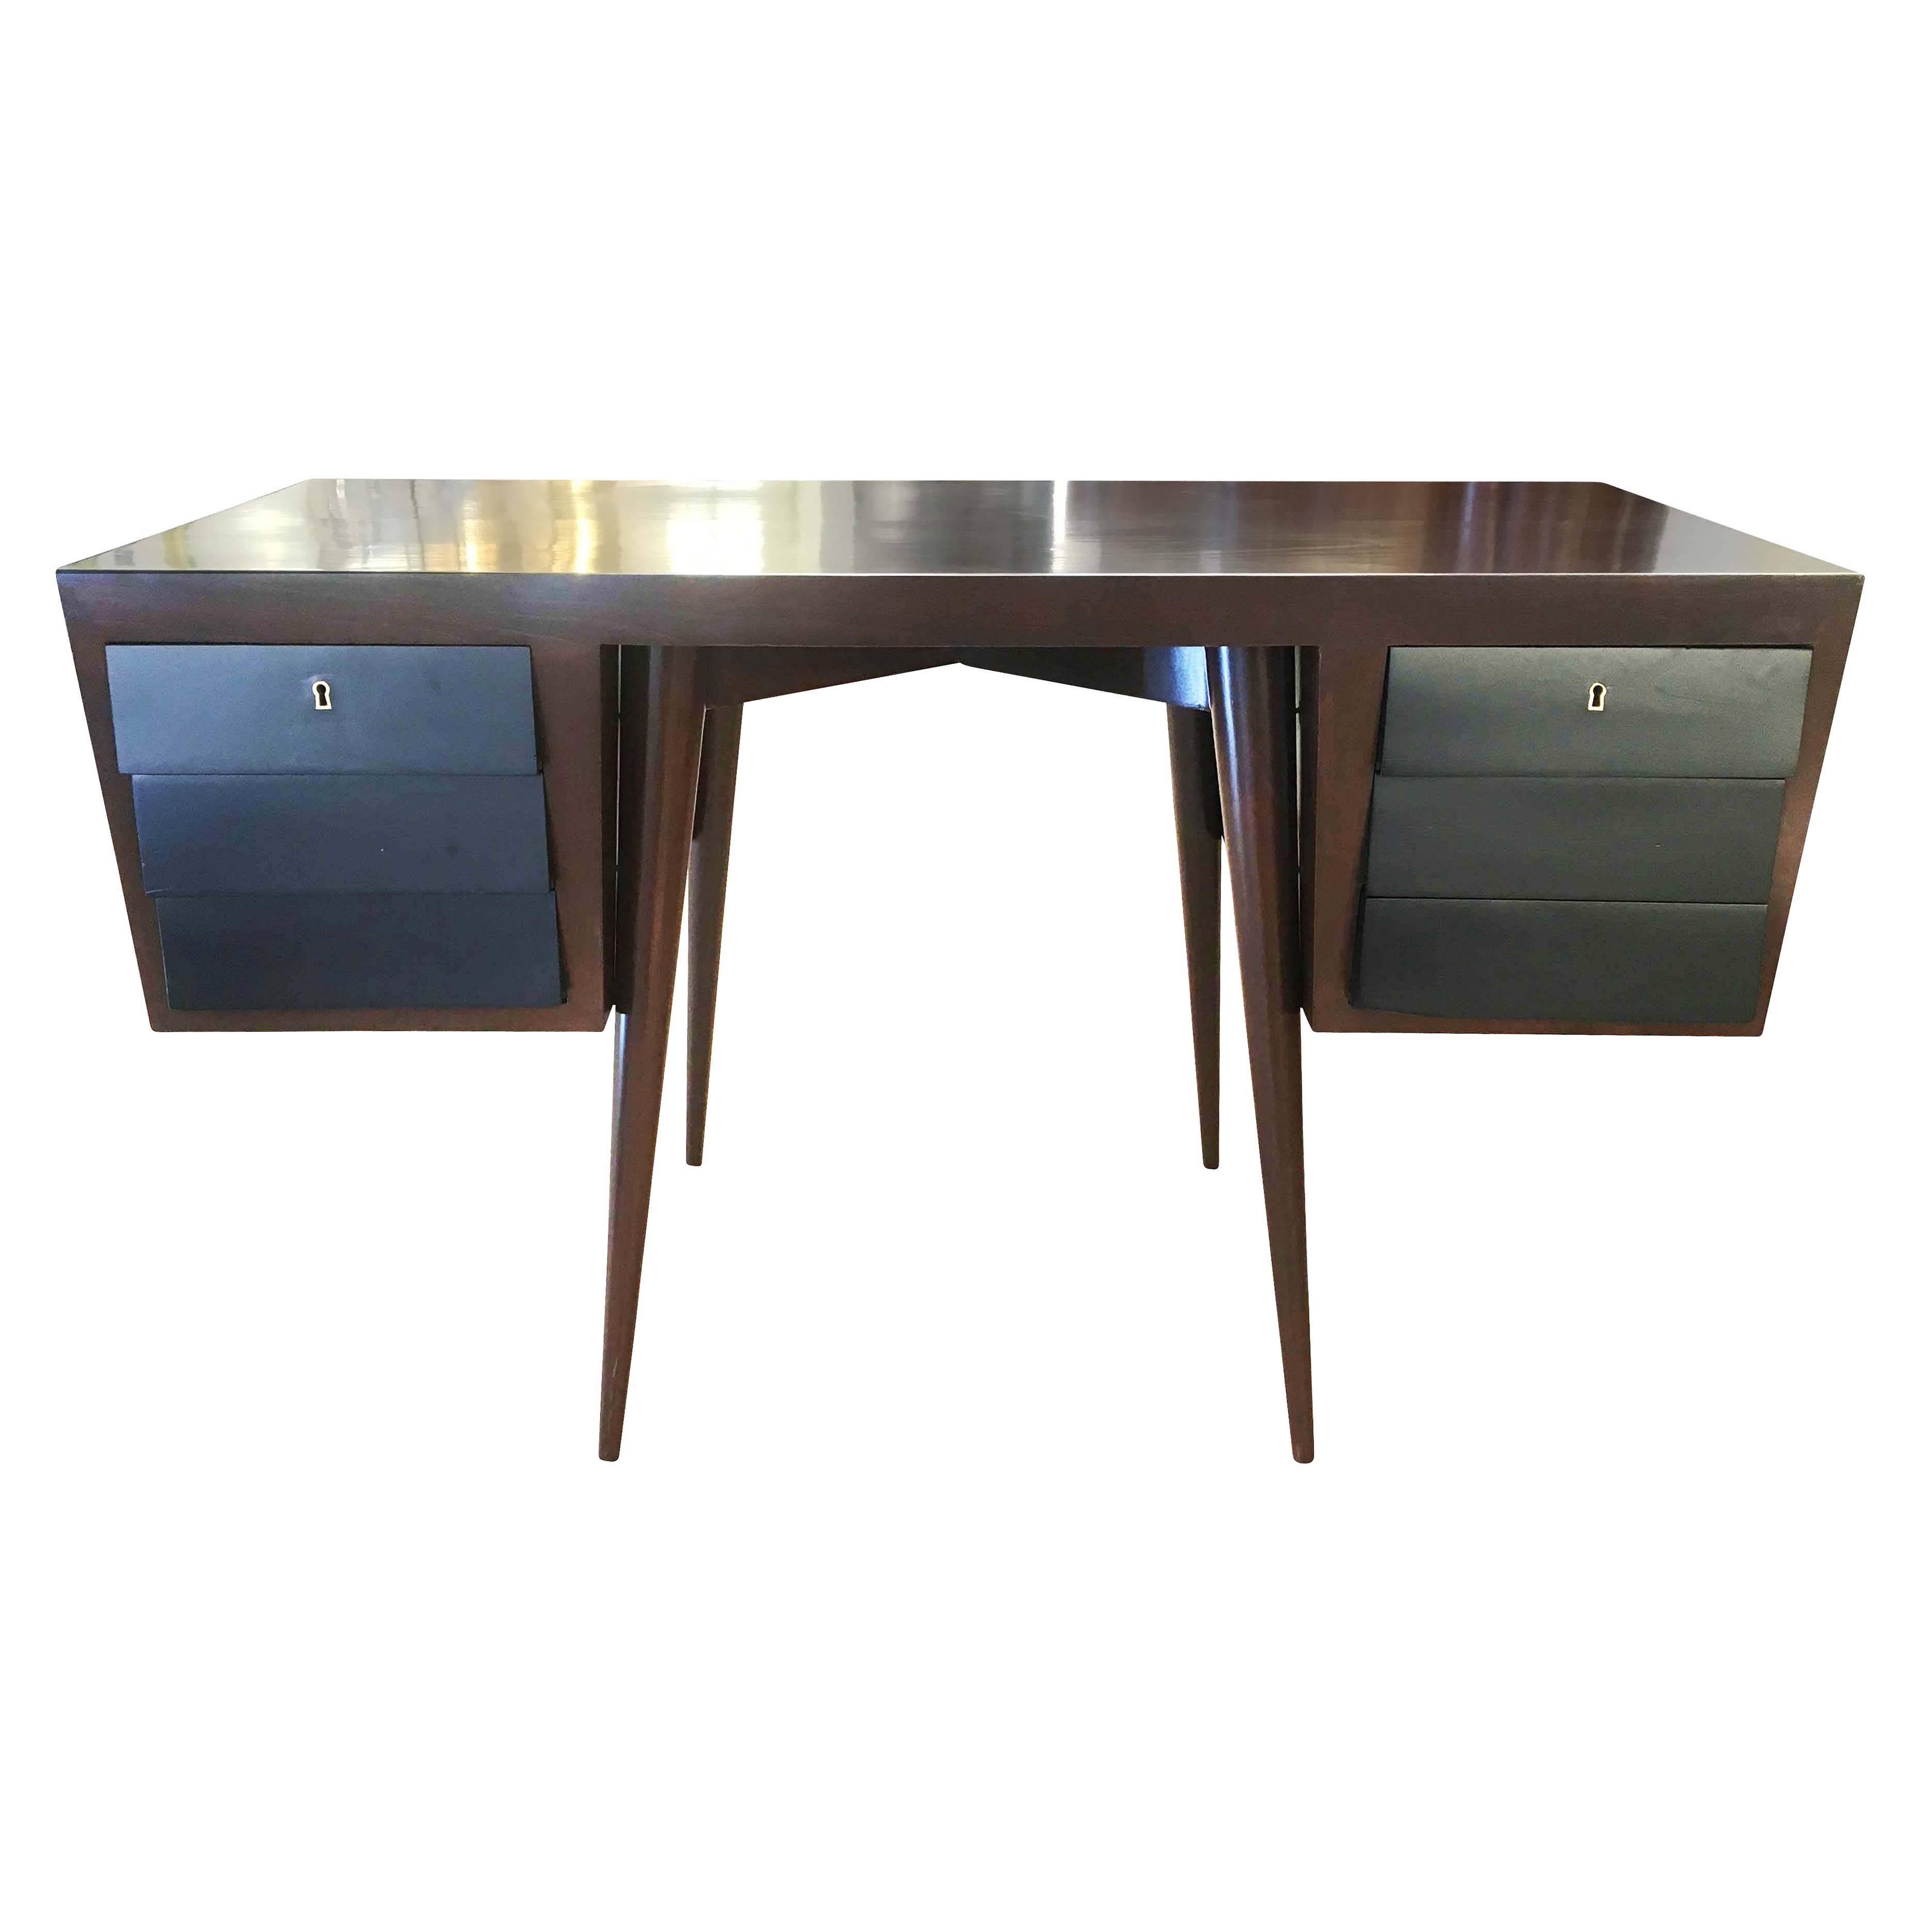 Italian Mid-Century desk refinished in a dark walnut and with ebonized drawers. The crossed legs and staggered drawers show a Scandinavian influence.
